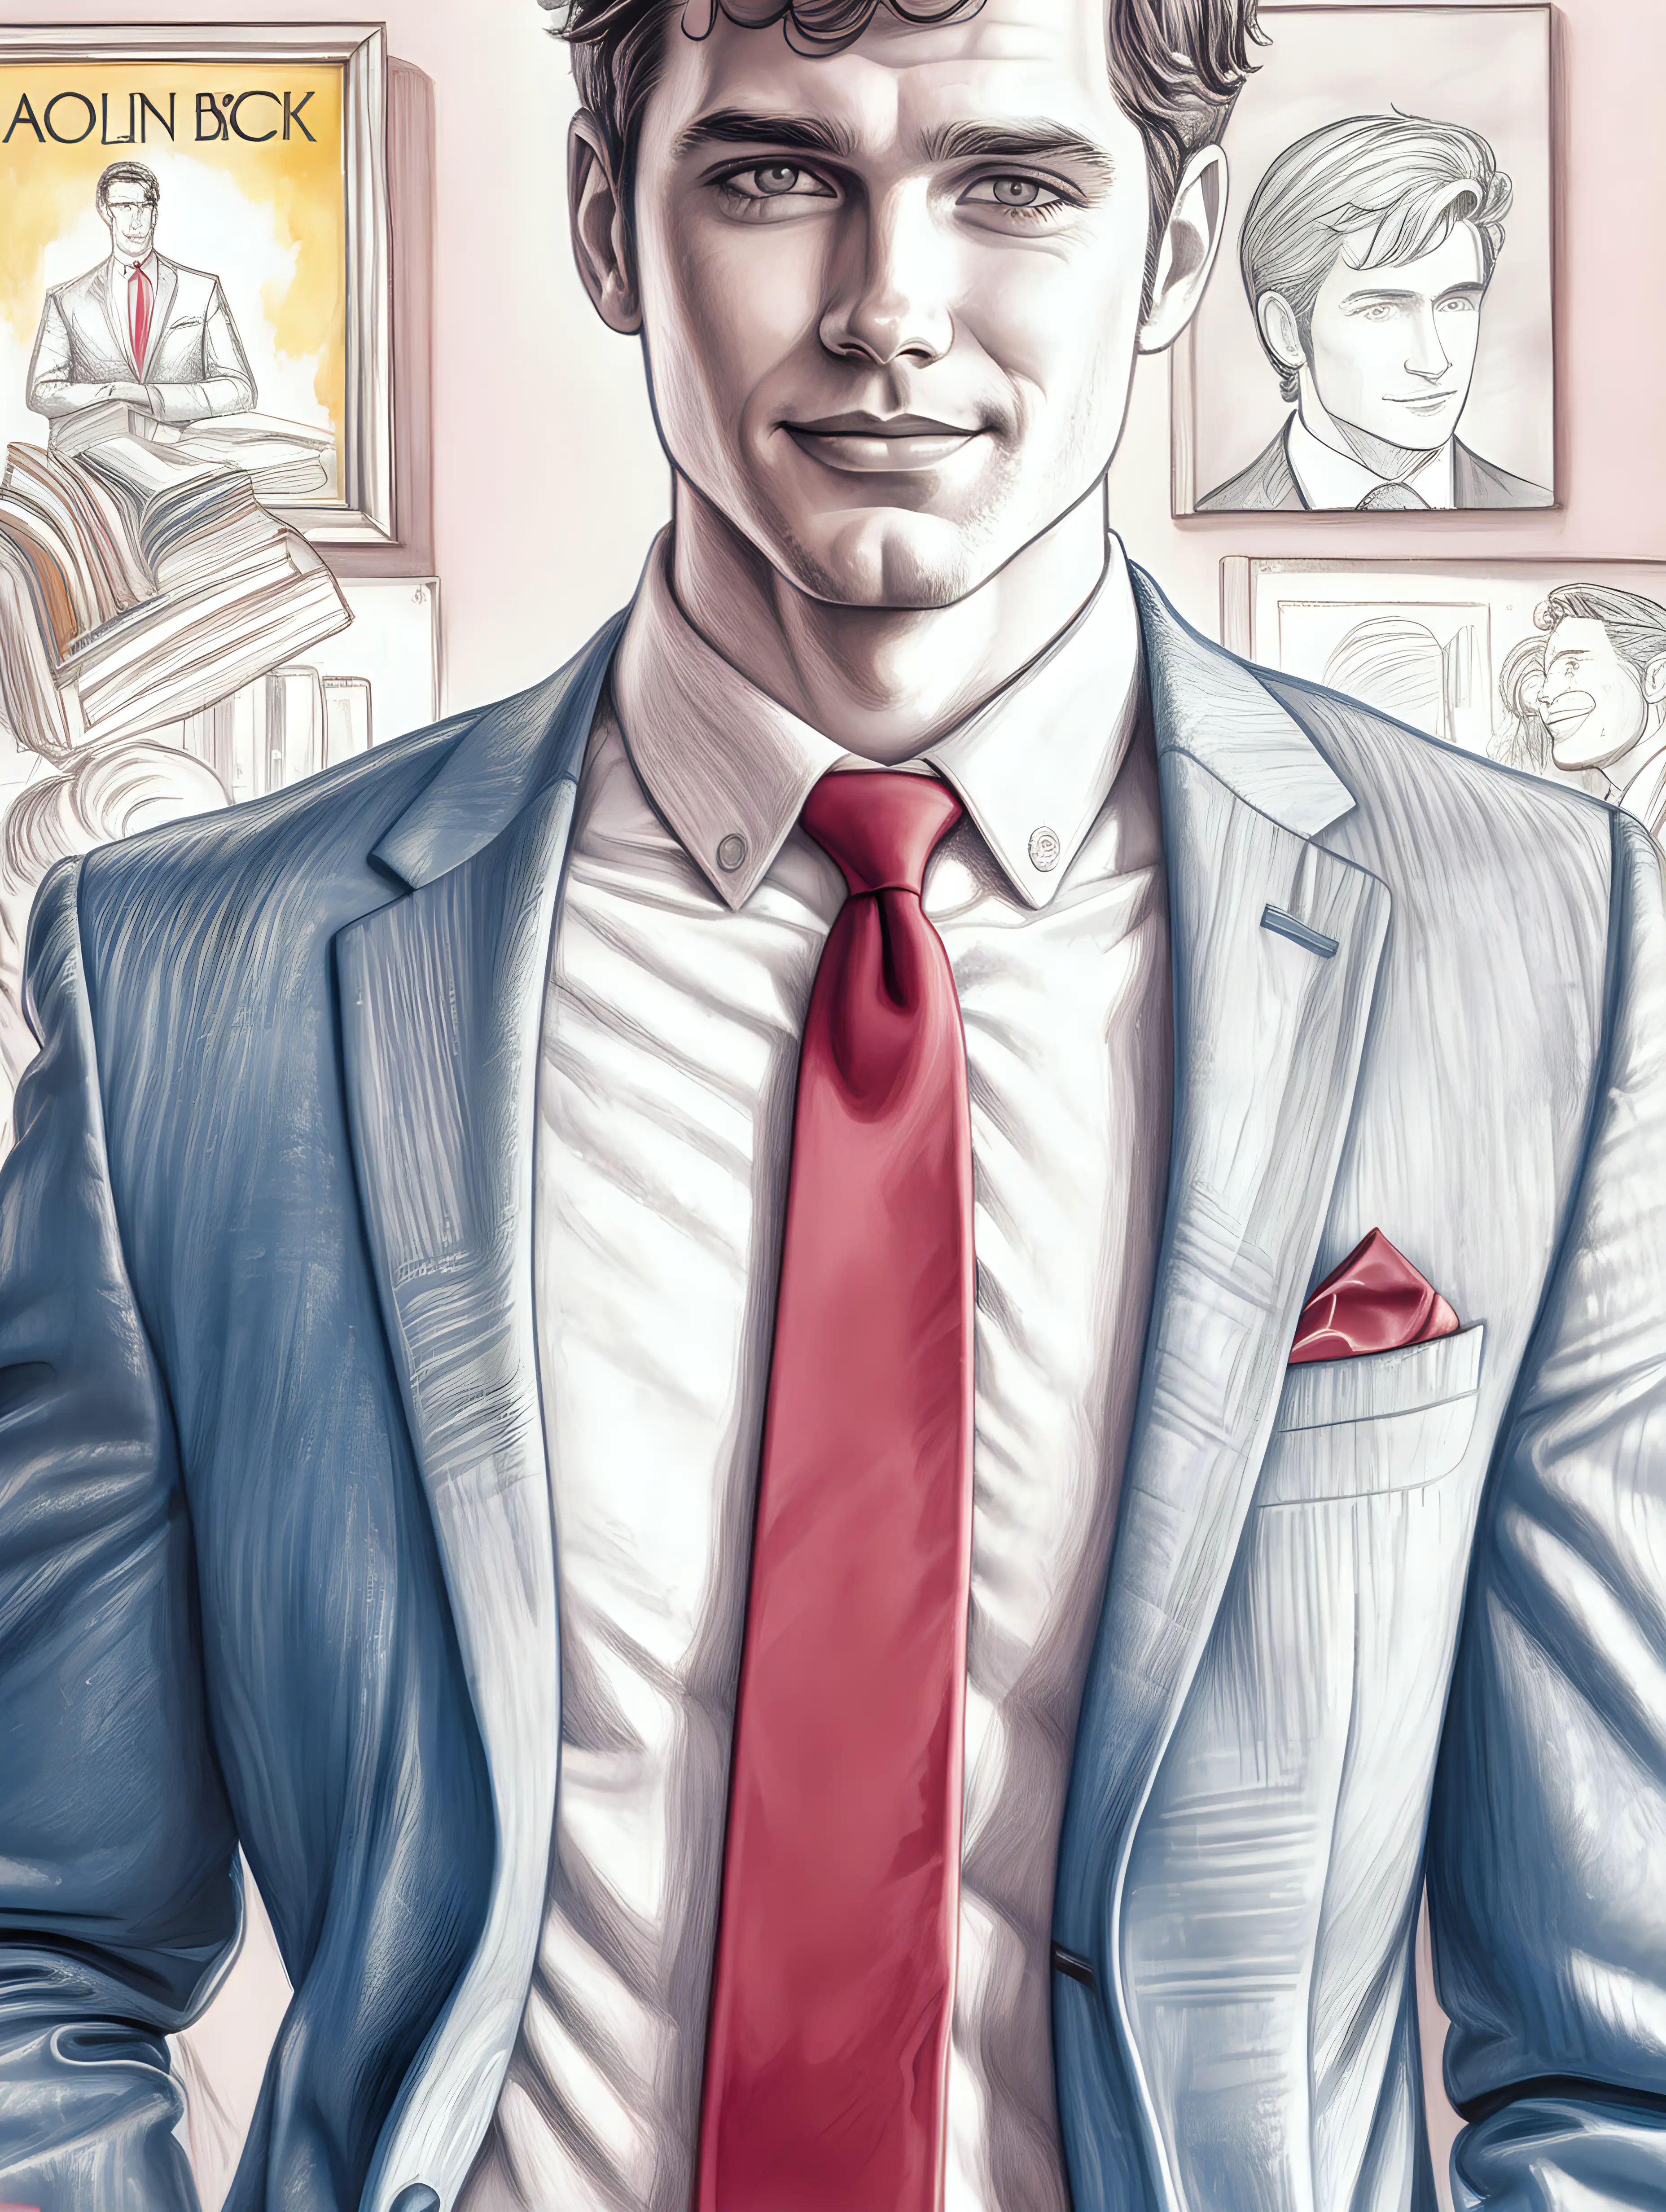 A book cover close-up colorful sketch of a suit and crimson tie, zoom in on the man's collar, in a rom-com animation style of THAT GUY book cover